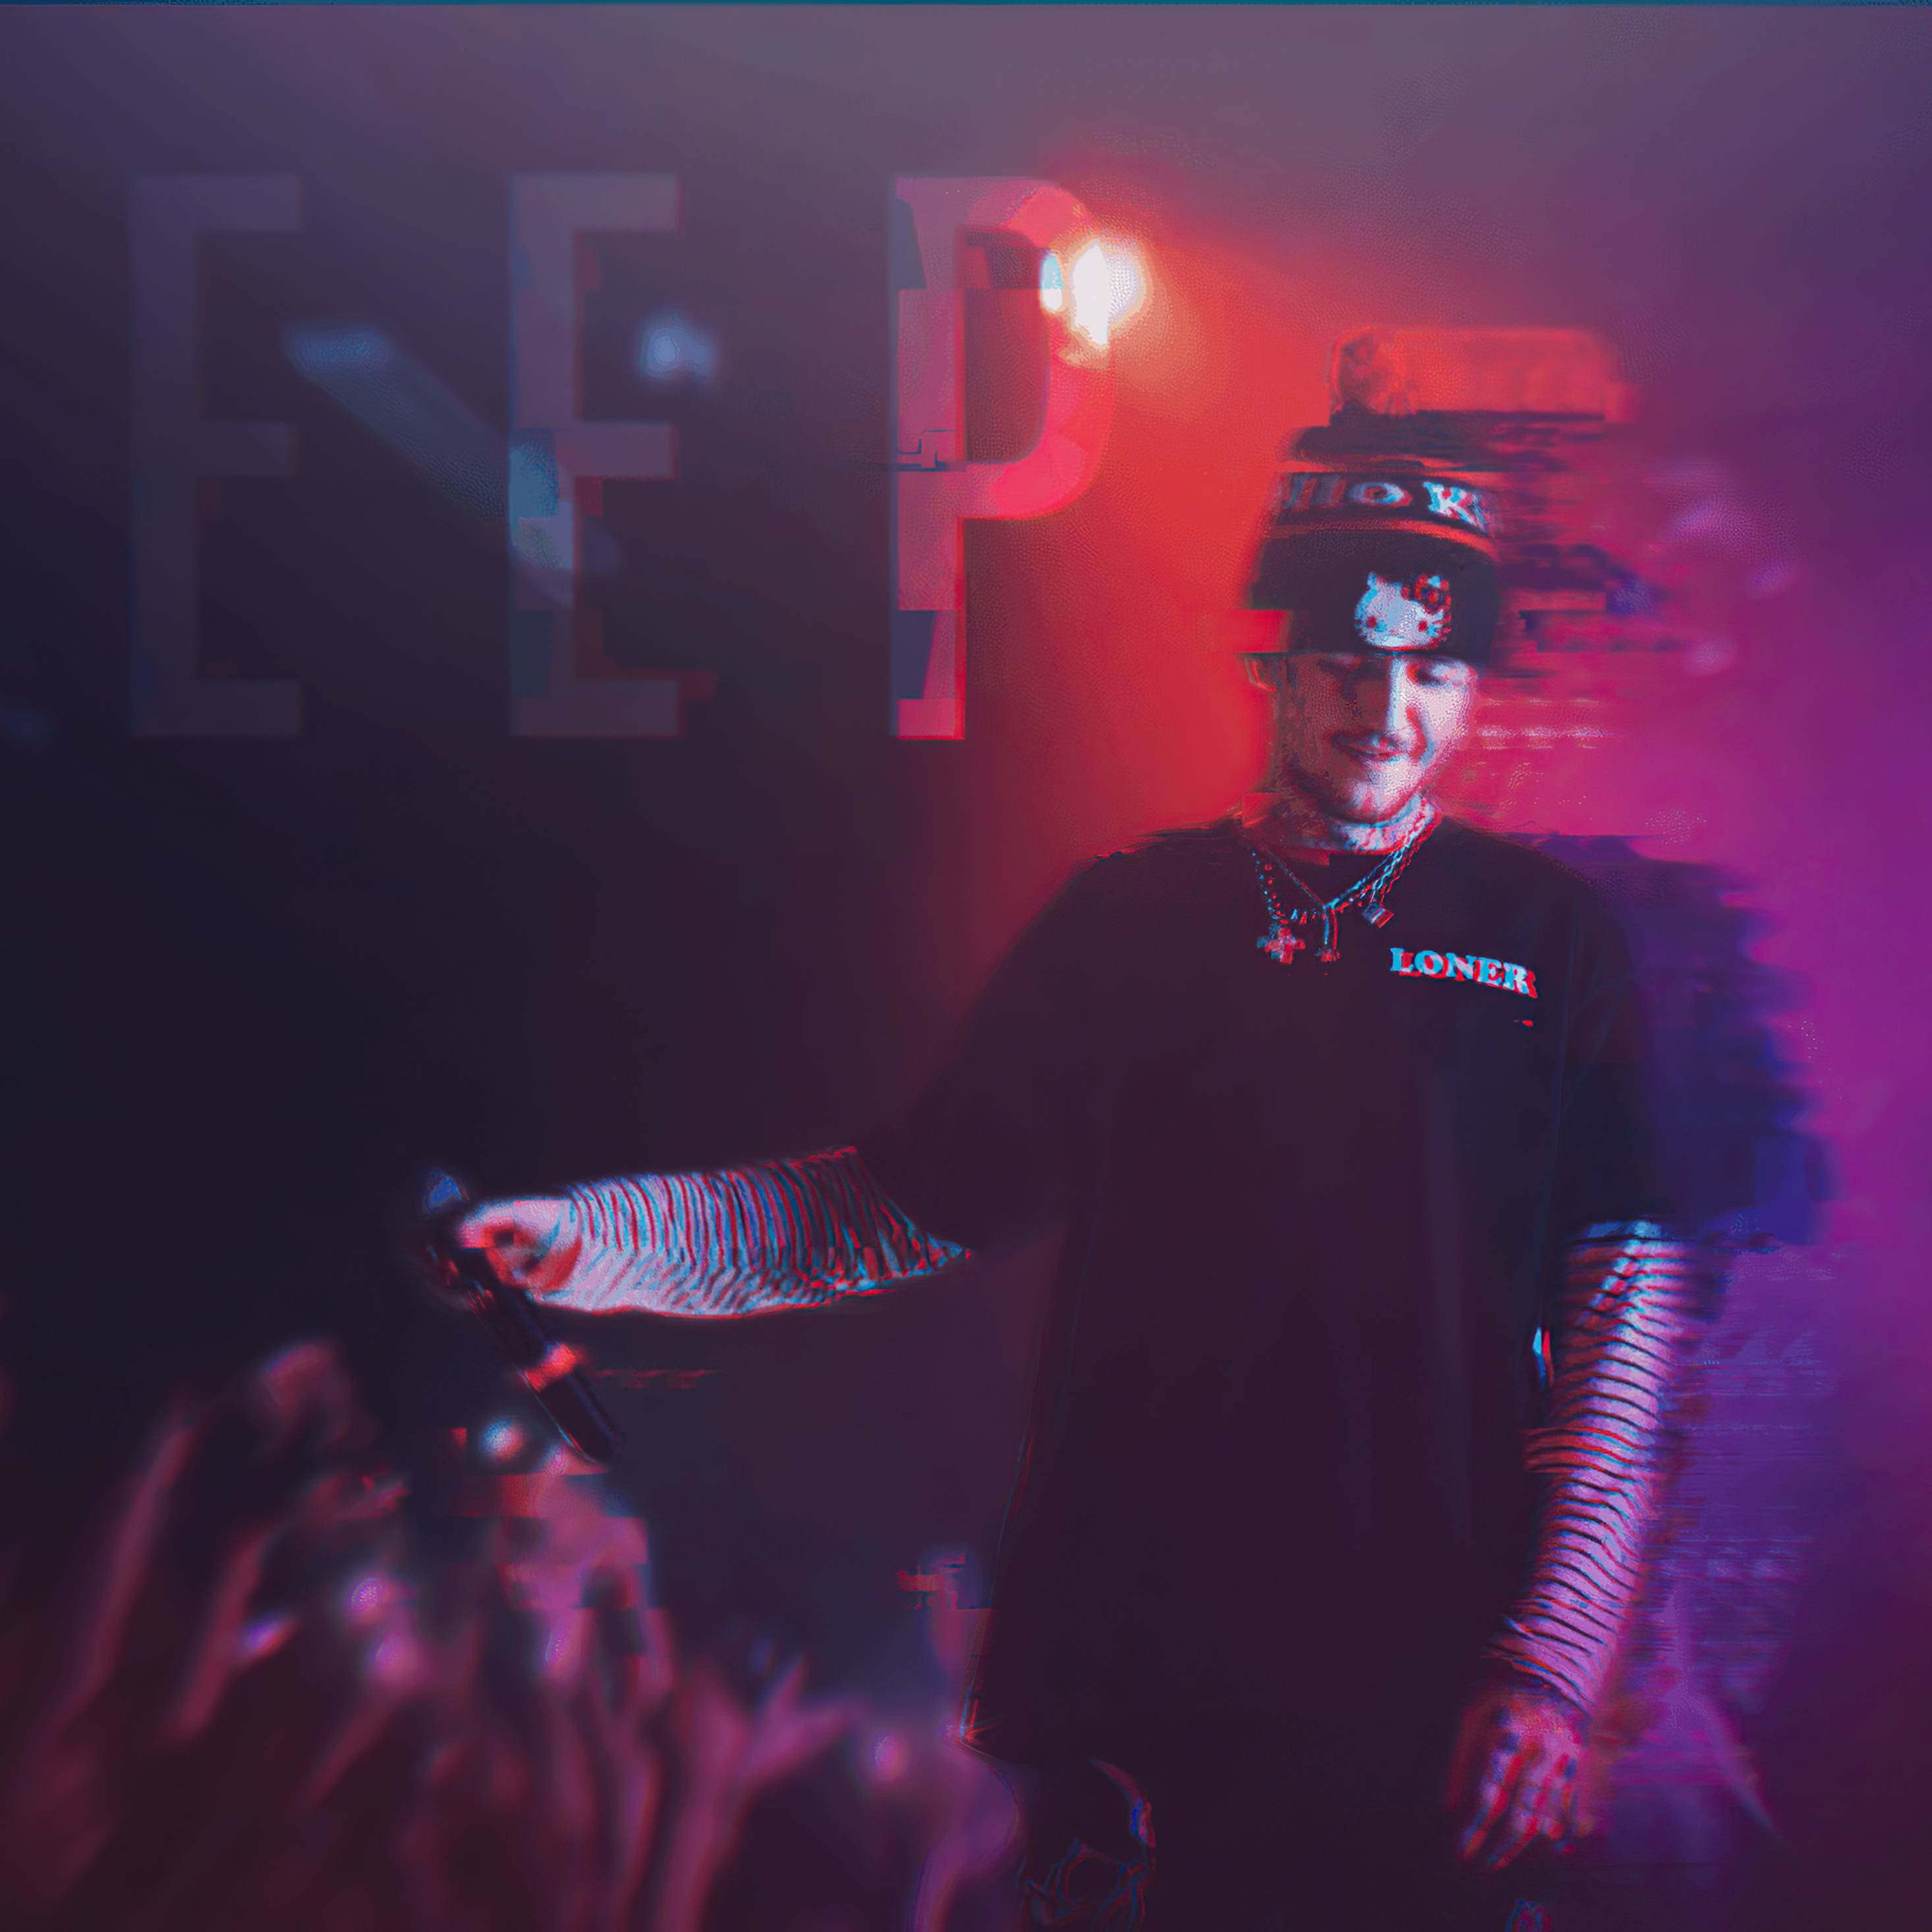 Lil Peep 2020 iPad Pro Retina Display HD 4k Wallpaper, Image, Background, Photo and Picture